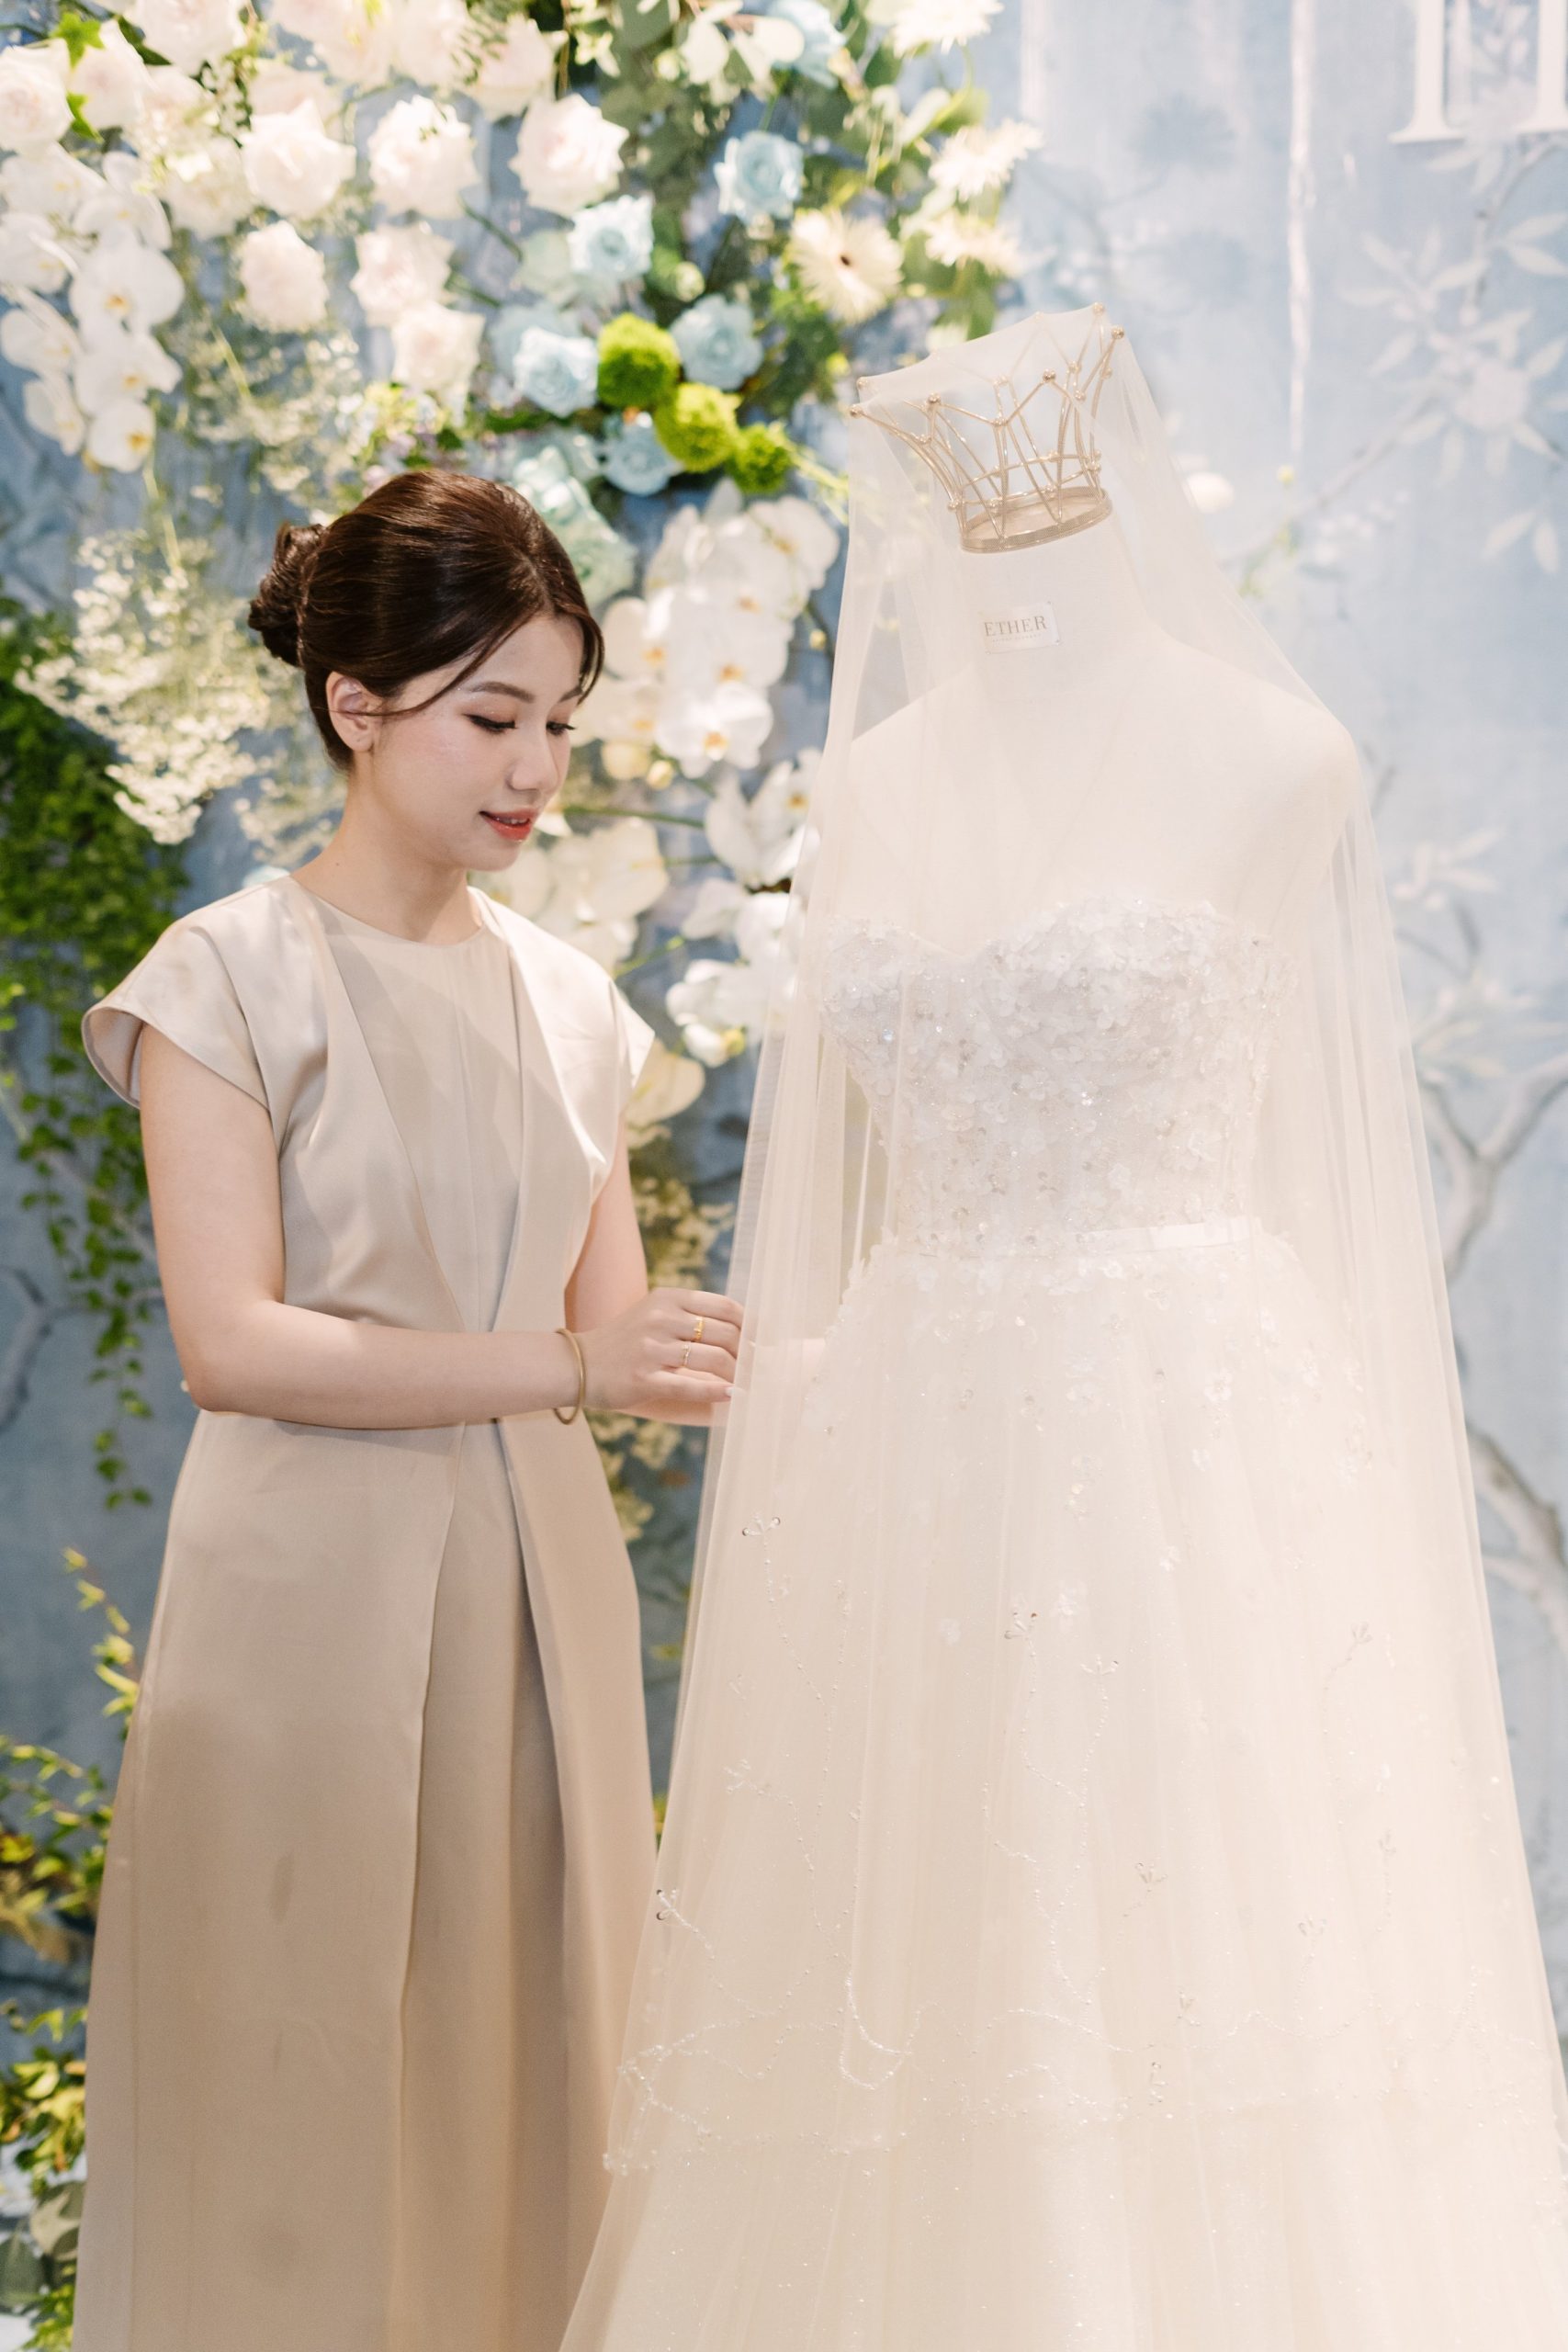 Minimalist, elegant wedding dress that suits each bride's body shape and personal style